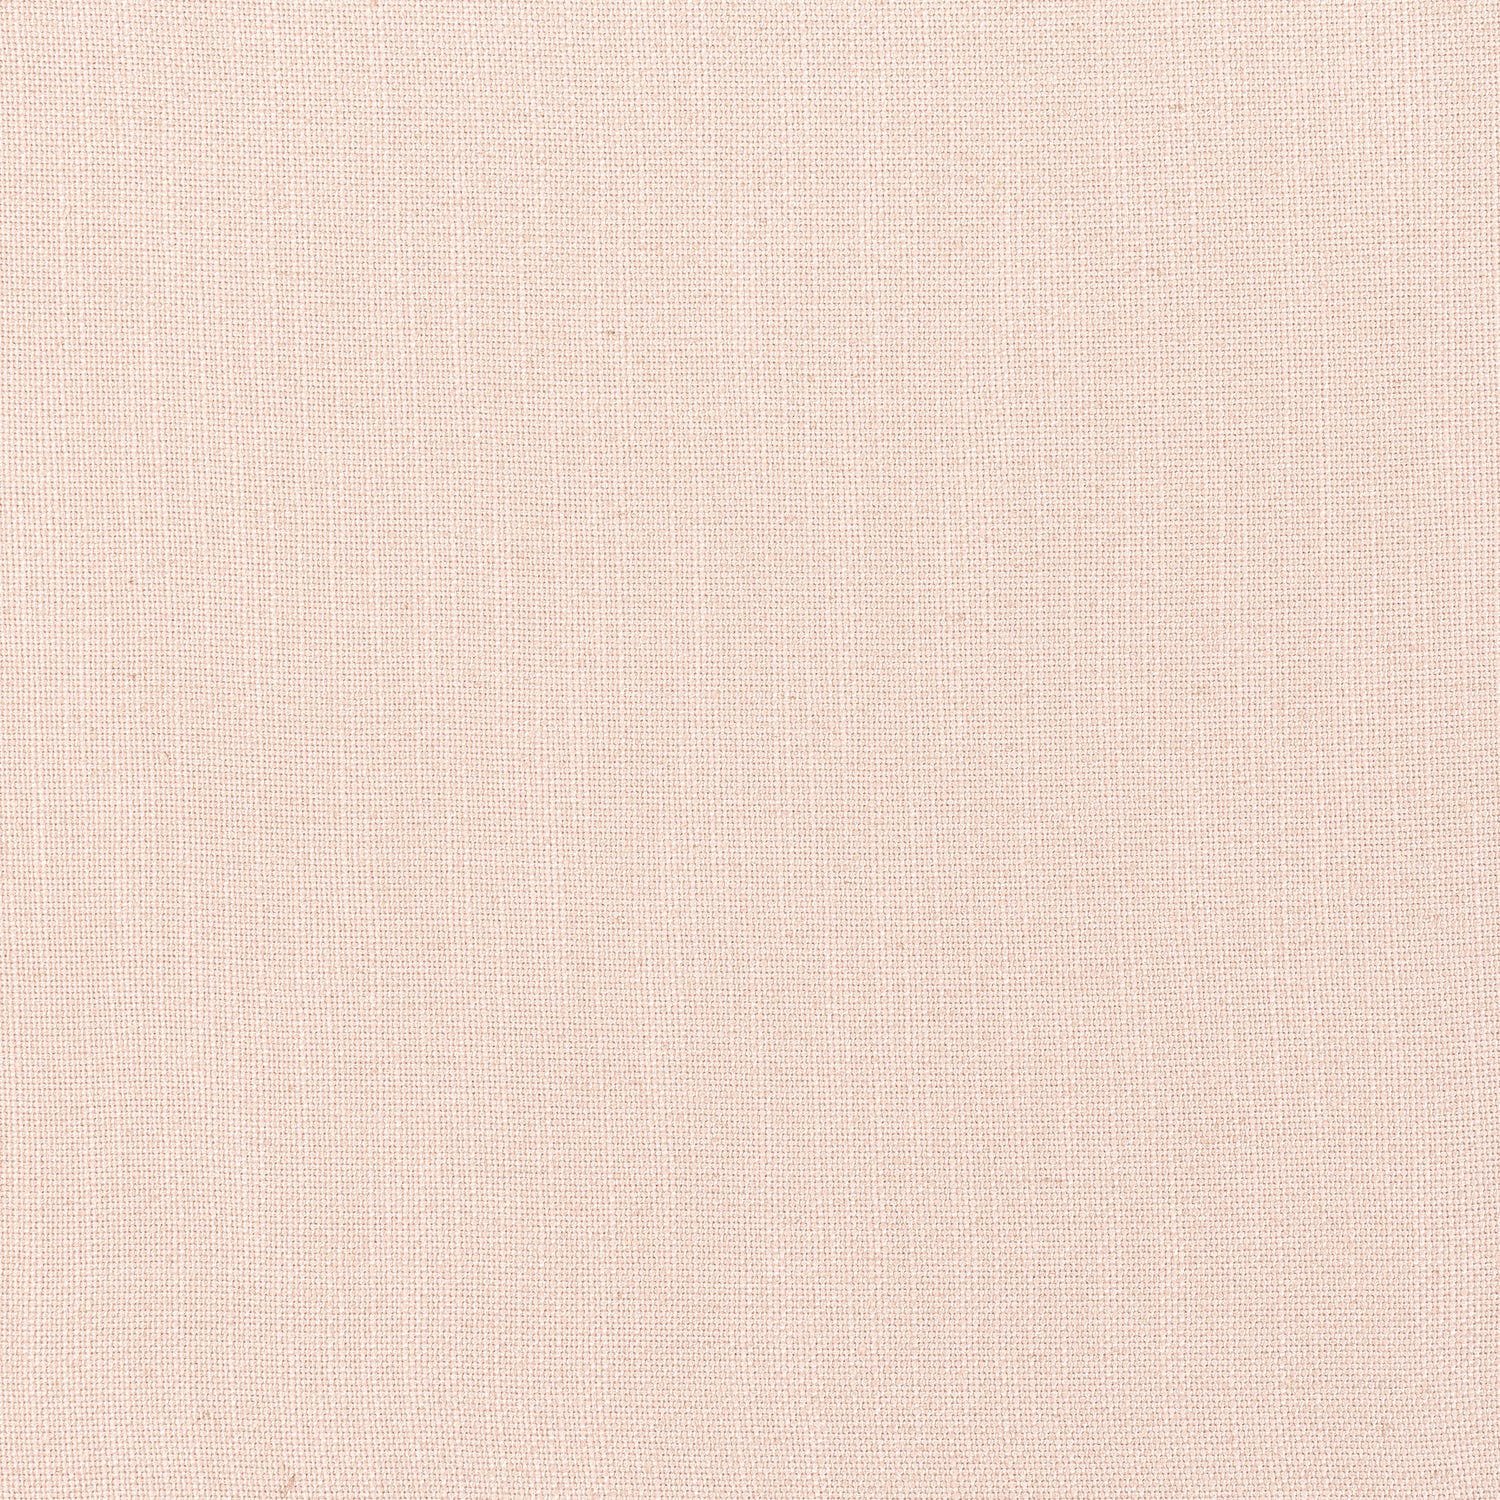 Palisade Linen fabric in blossom color - pattern number FWW7632 - by Thibaut in the Palisades collection